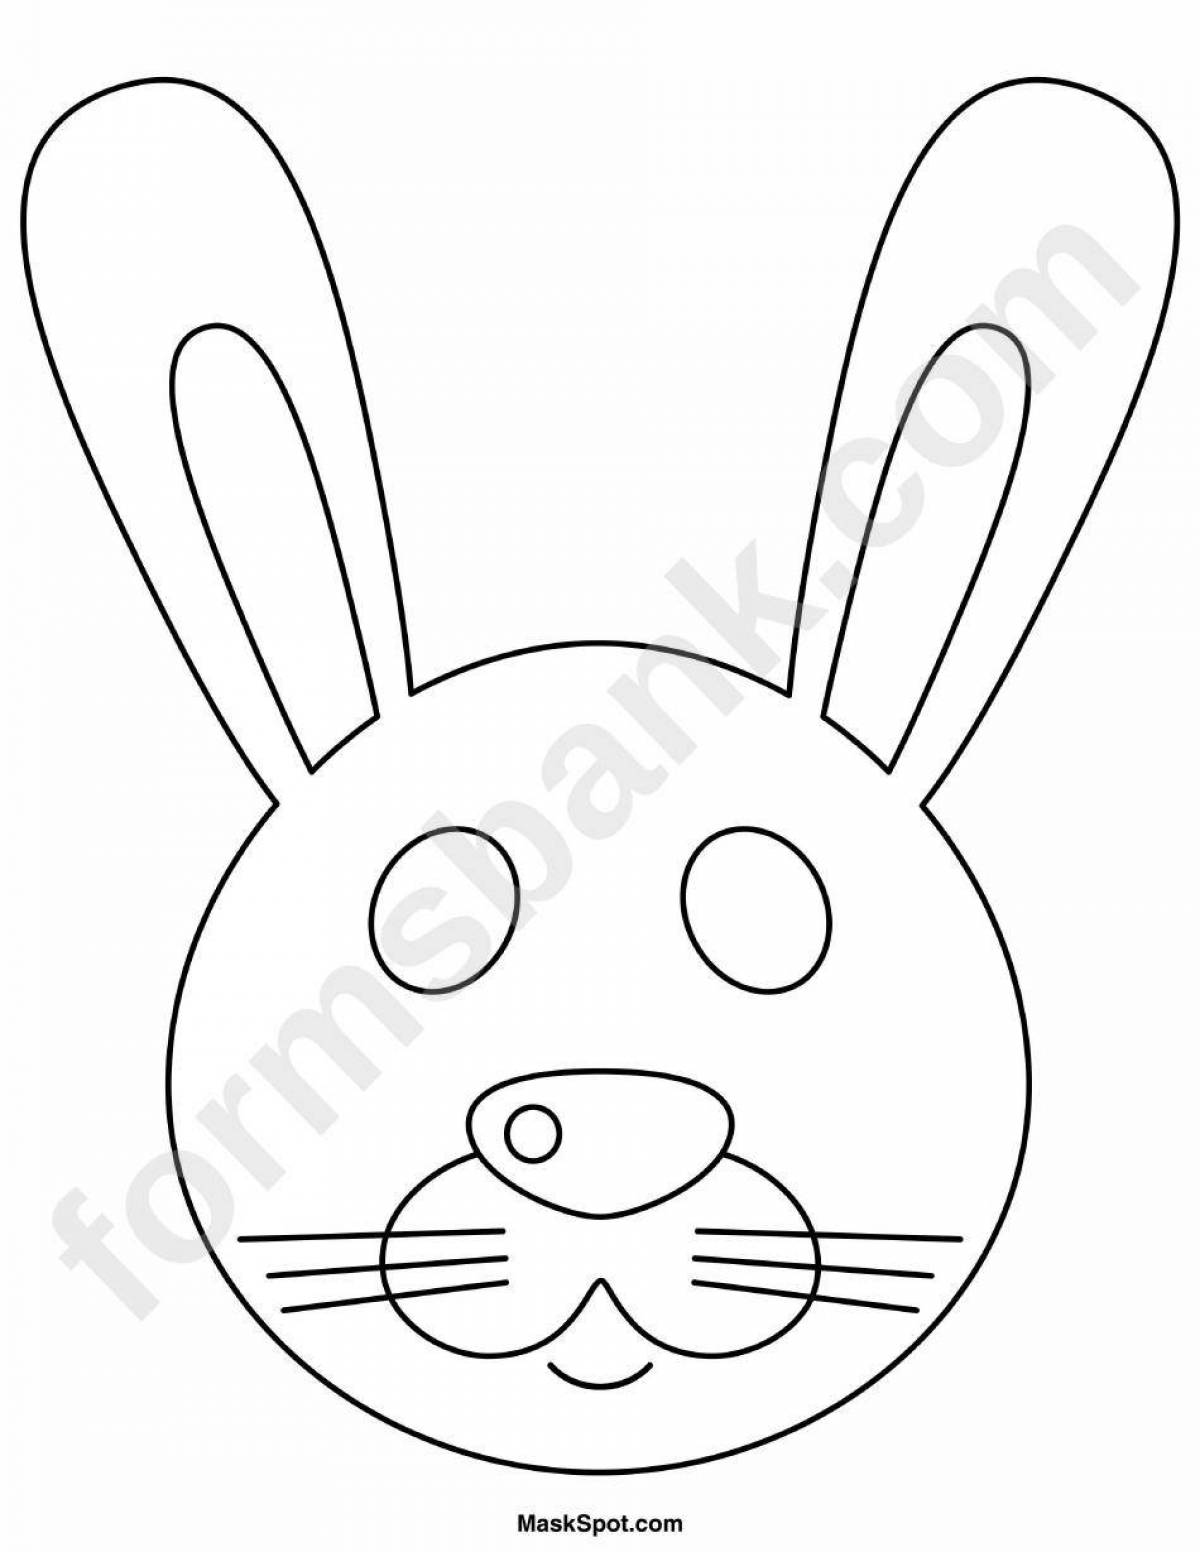 Coloring book gorgeous face of a hare